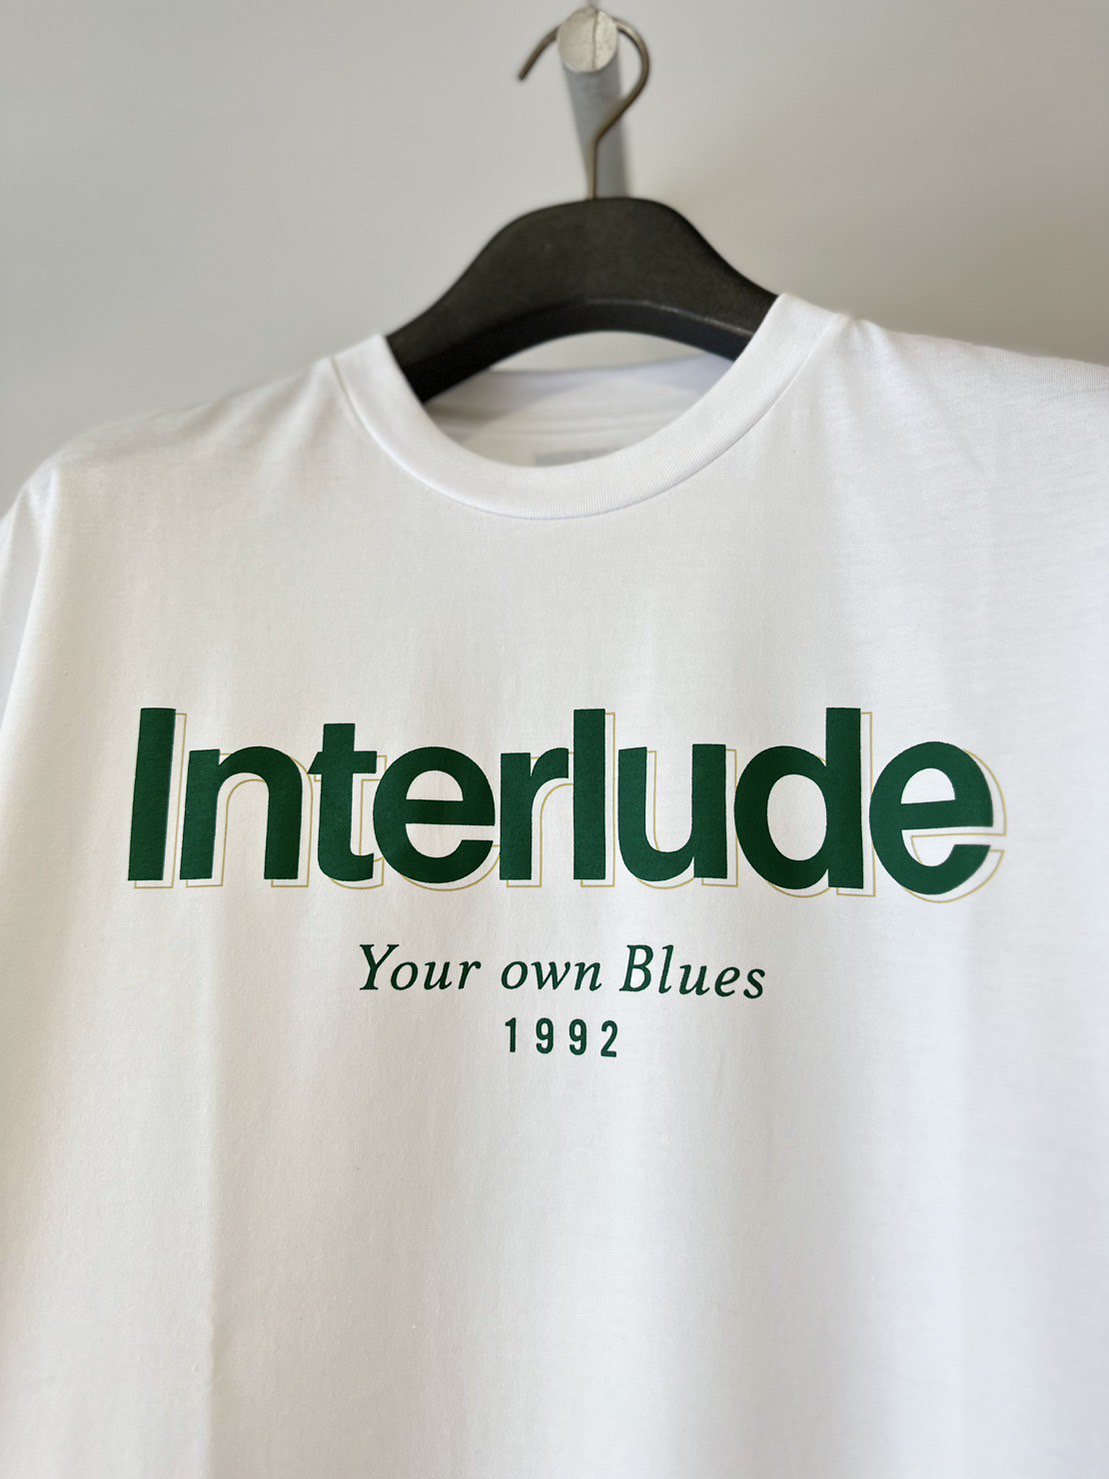 ALLEGE<br />Interlude Tee / White <img class='new_mark_img2' src='https://img.shop-pro.jp/img/new/icons14.gif' style='border:none;display:inline;margin:0px;padding:0px;width:auto;' />